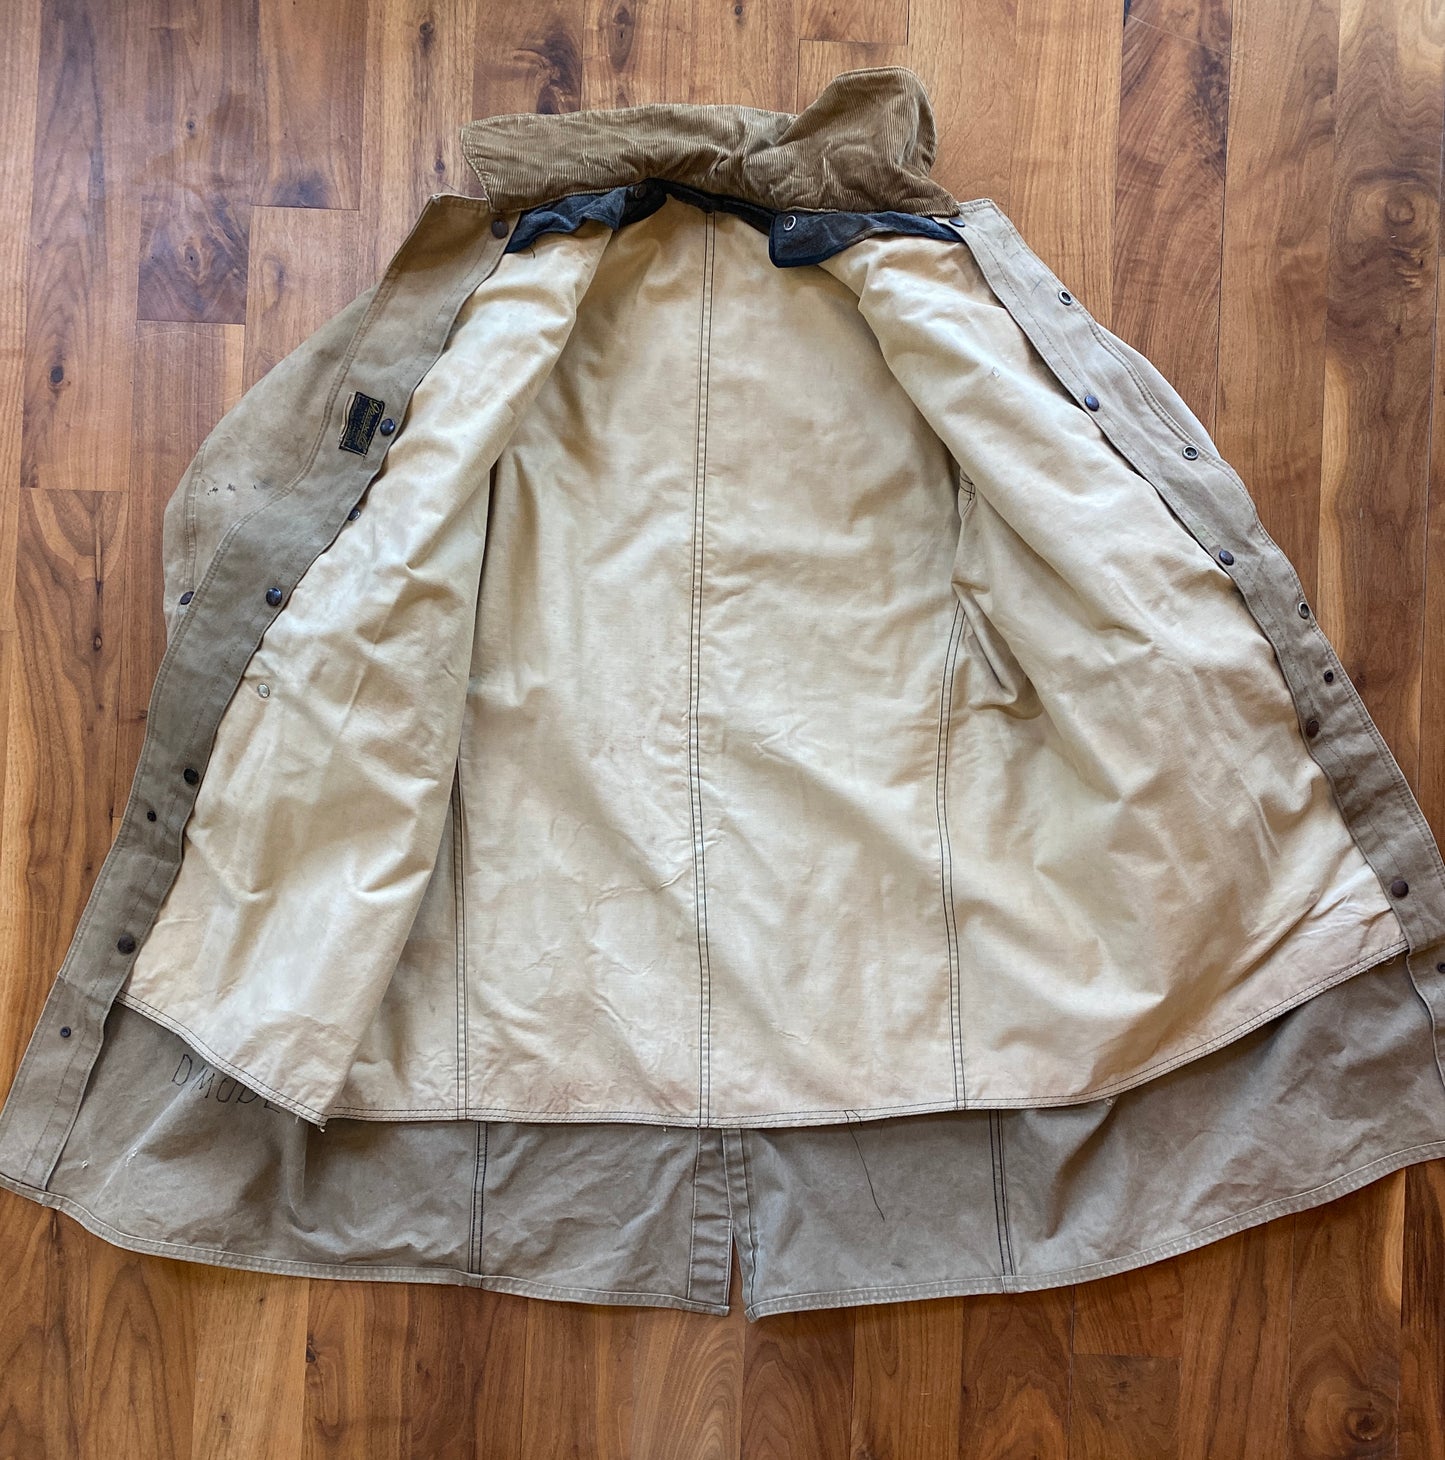 1950s Janesville Apparel Union Made Fire Coat Size 44